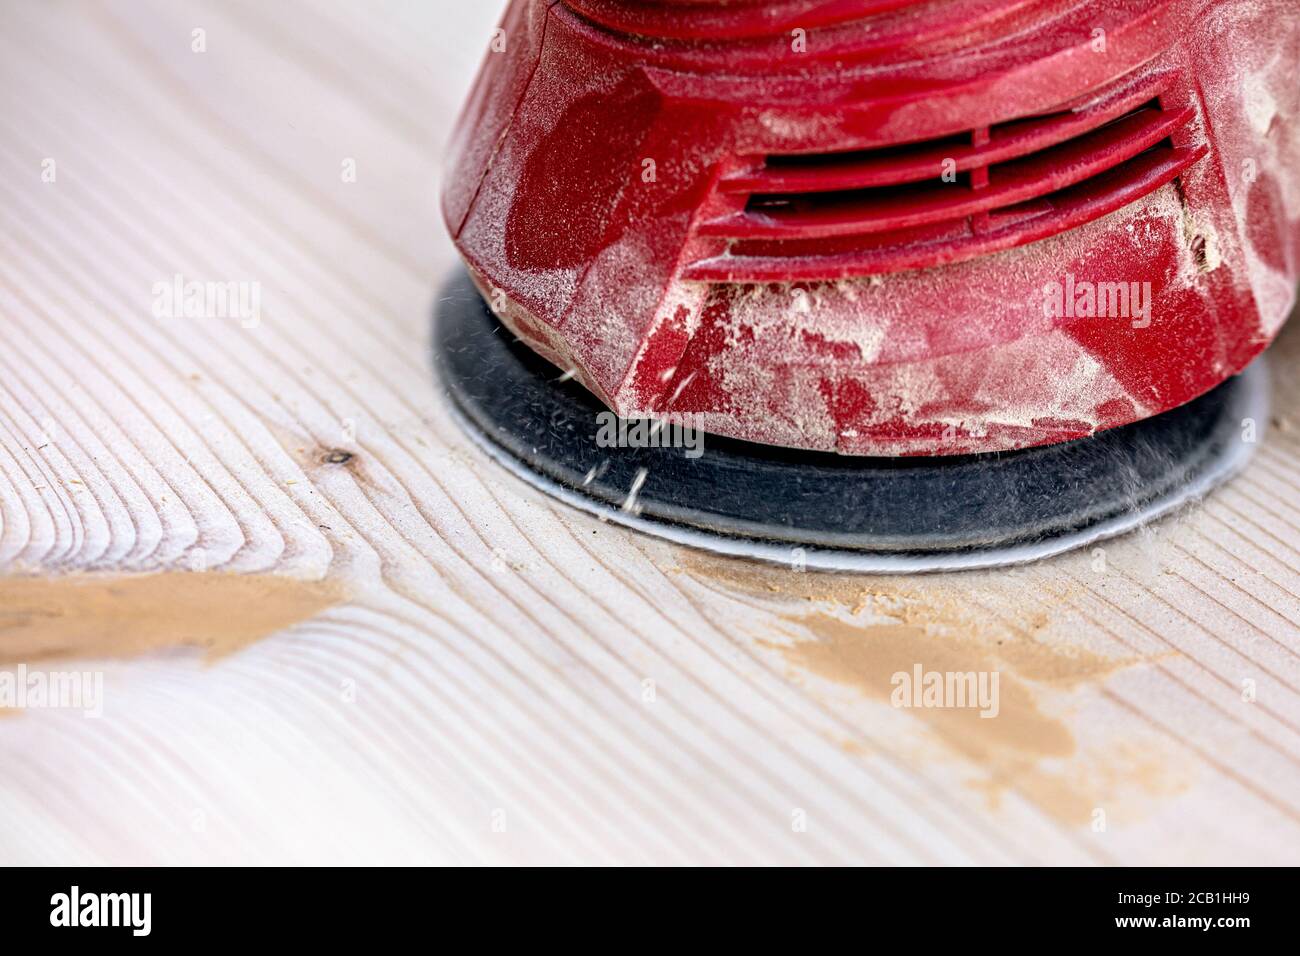 sanding a board with an random orbital sander or rotary sander, wooden board is filled with some paste Stock Photo